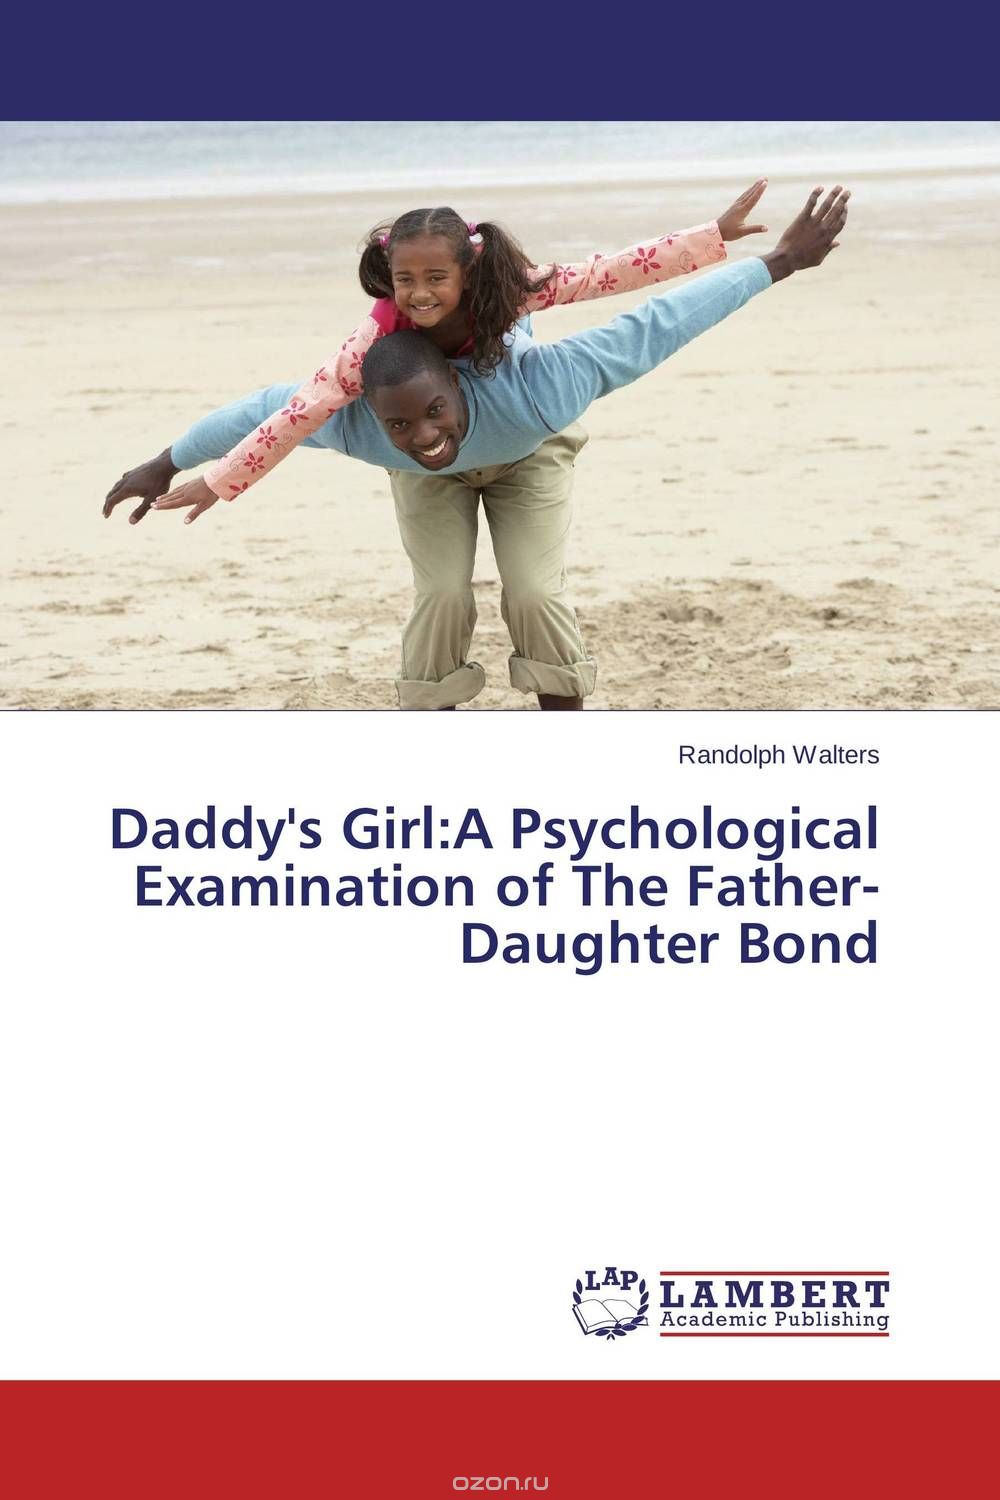 Daddy's Girl:A Psychological Examination of The Father-Daughter Bond